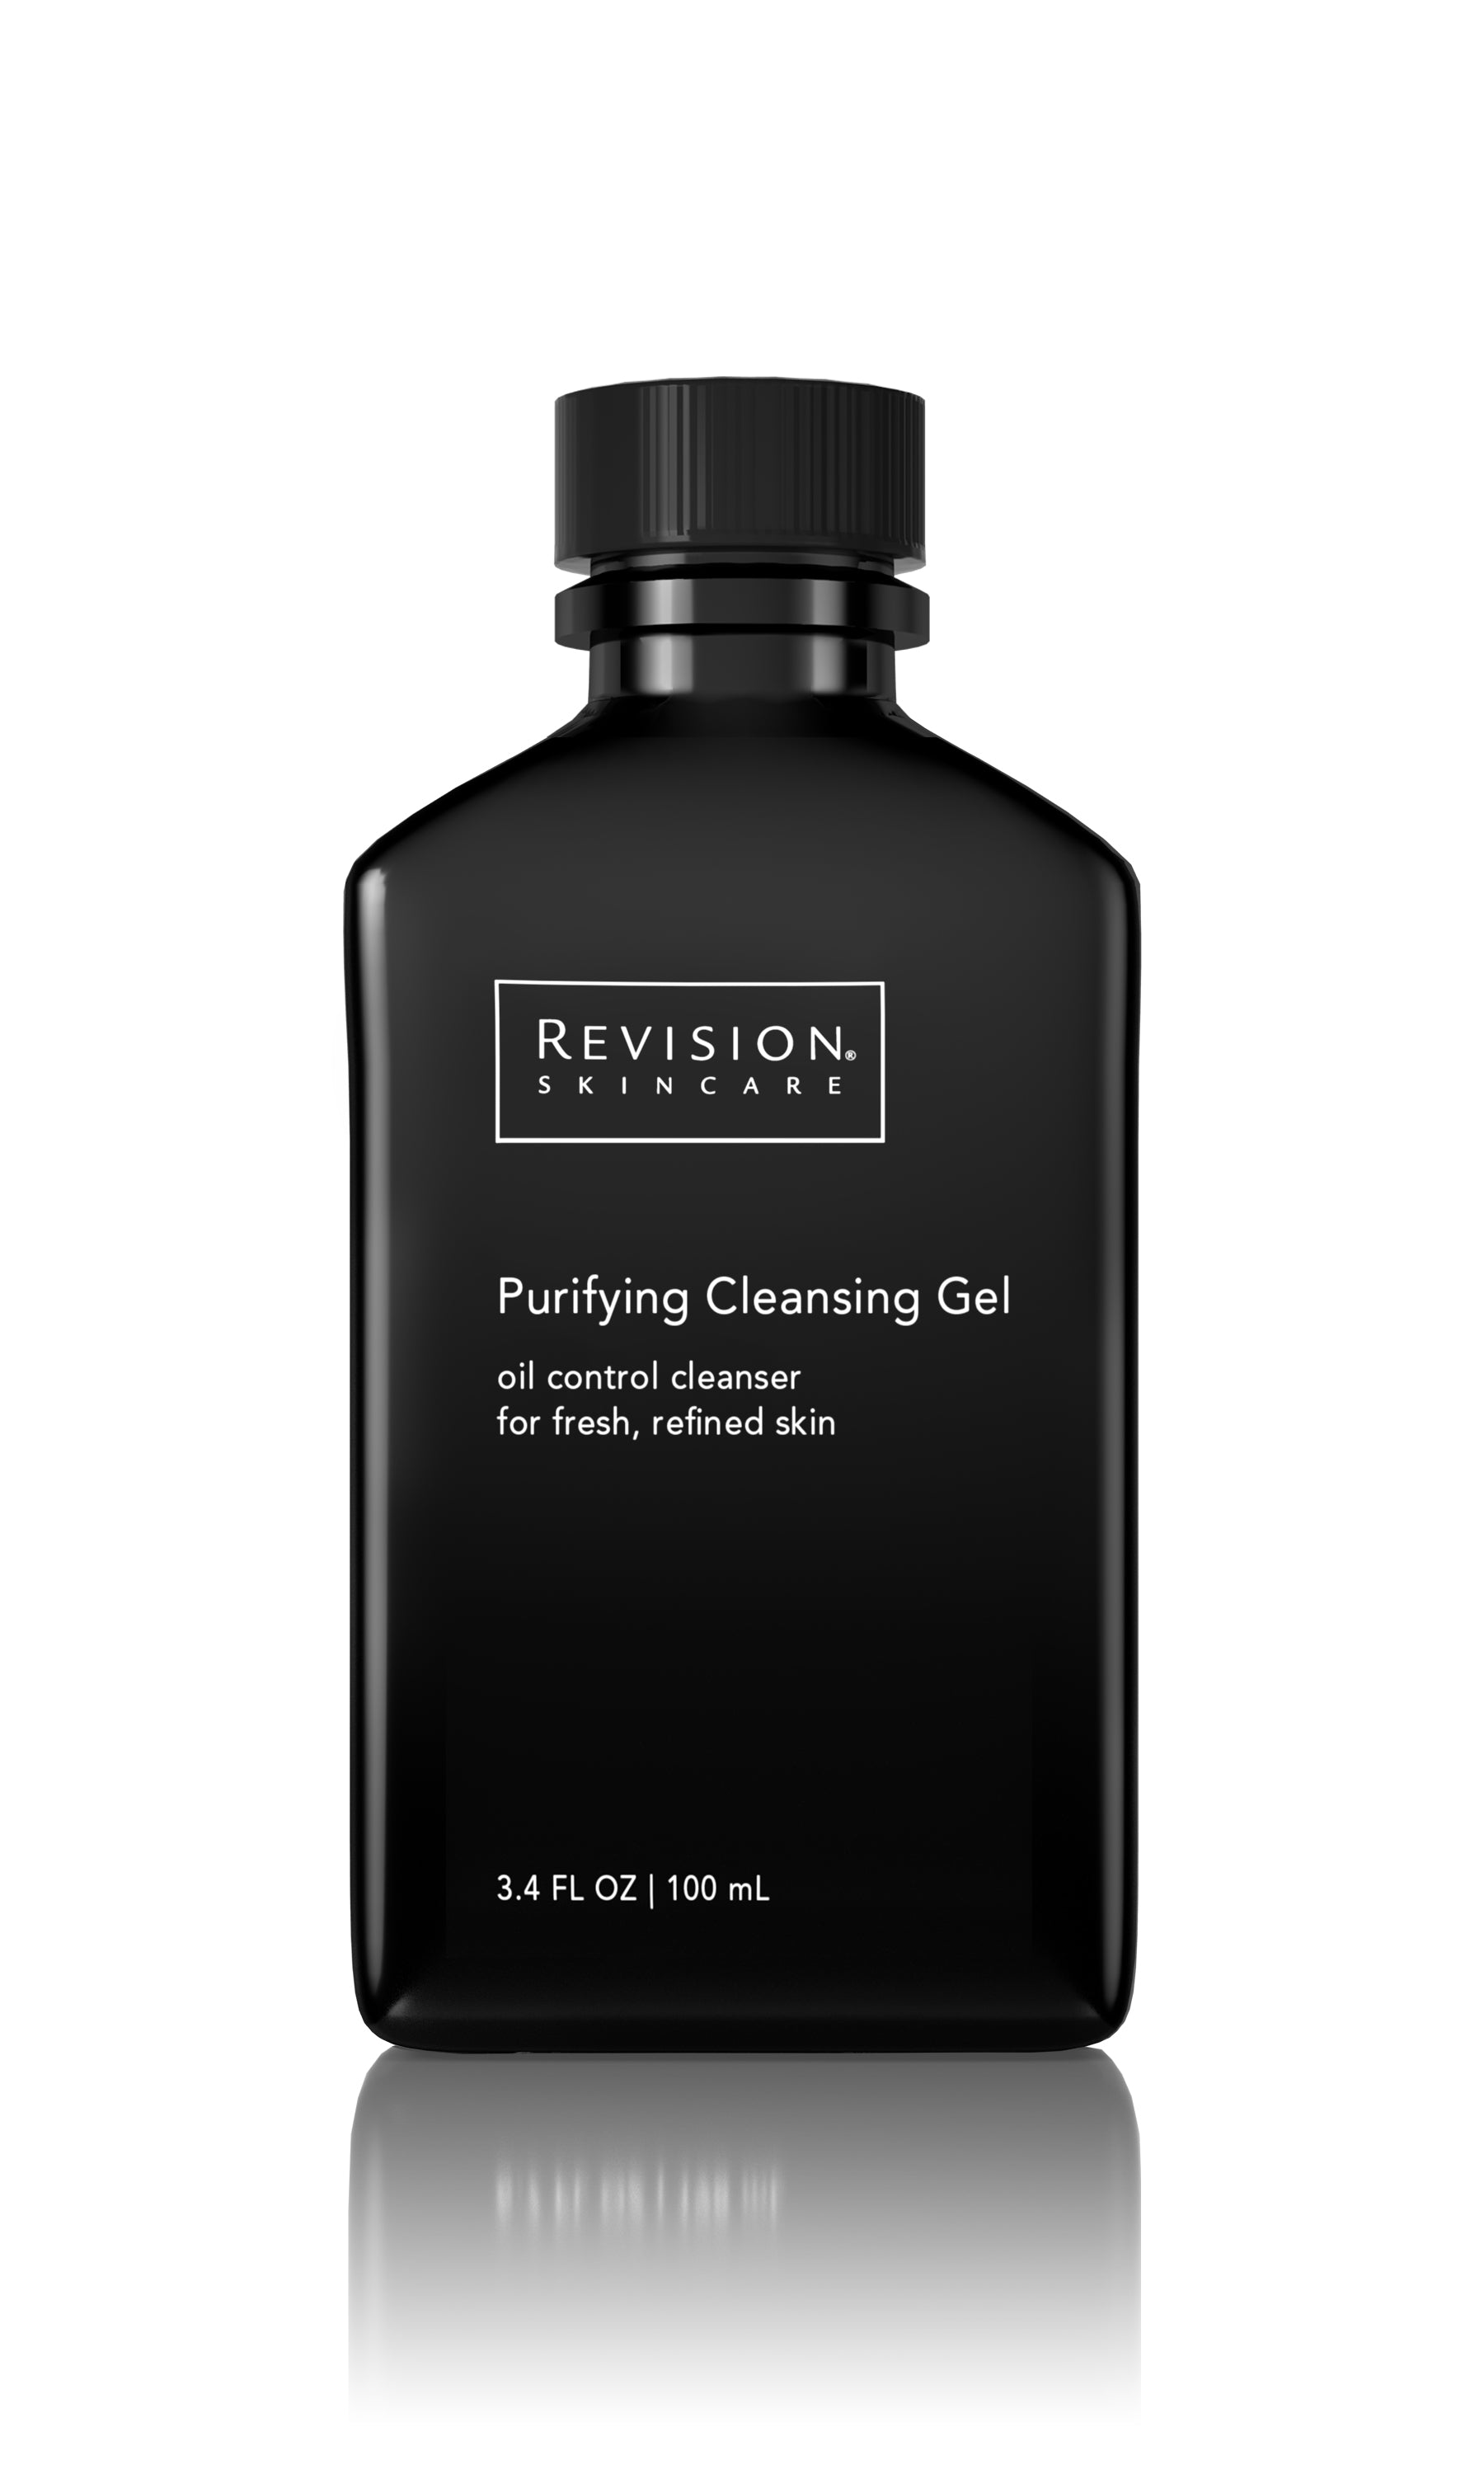 Revision Skincare Purifying Cleansing Gel (3.4 oz)